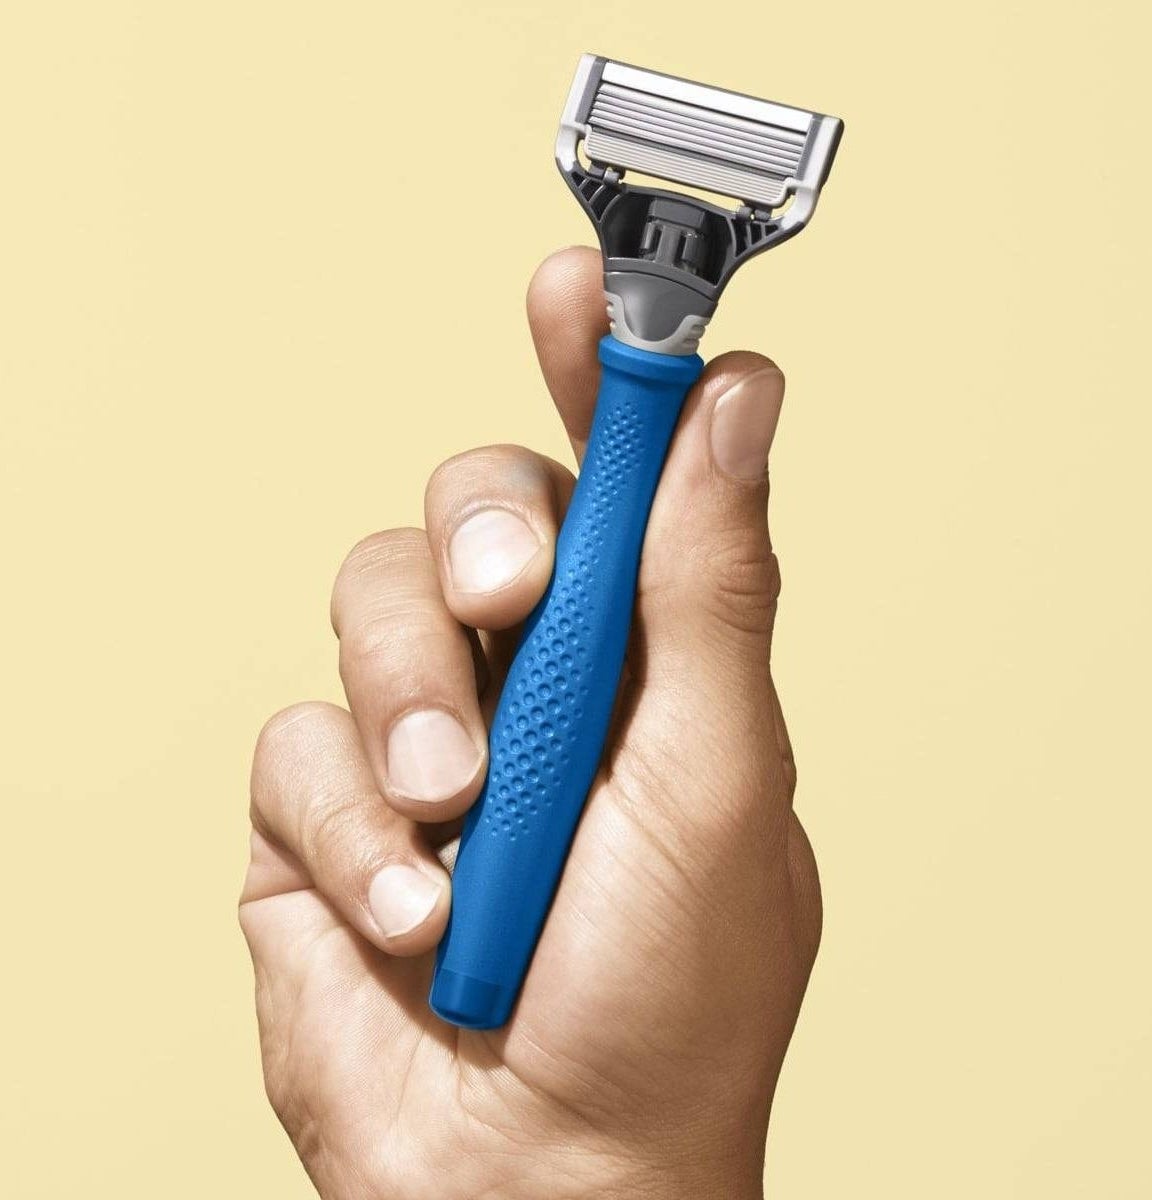 The razor being held to show its five blades and size